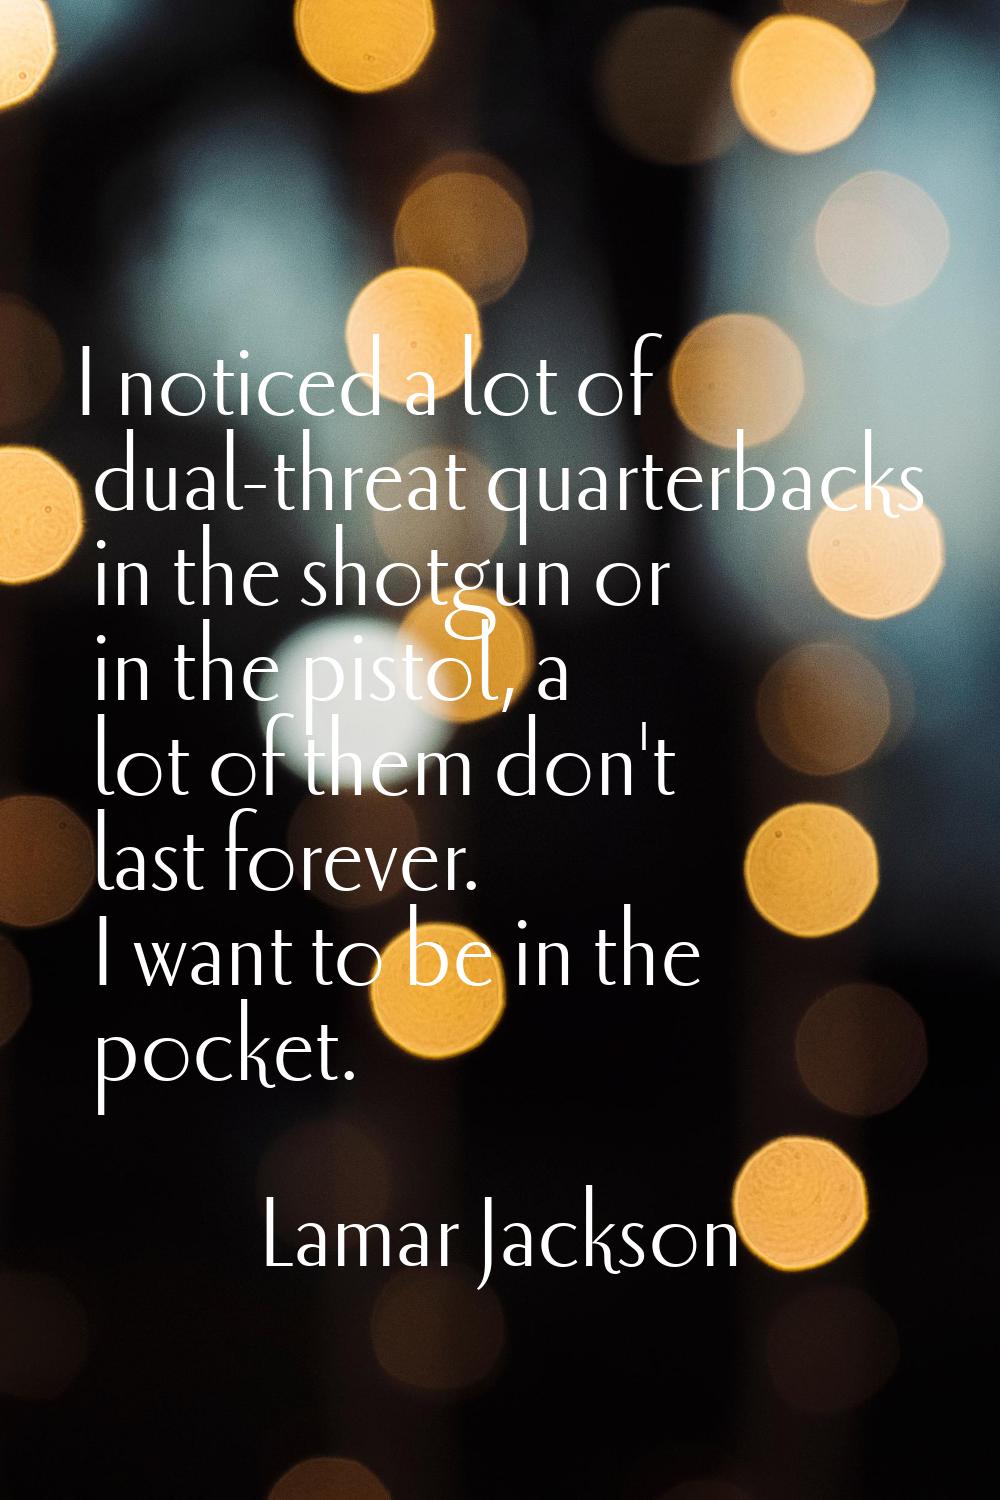 I noticed a lot of dual-threat quarterbacks in the shotgun or in the pistol, a lot of them don't la